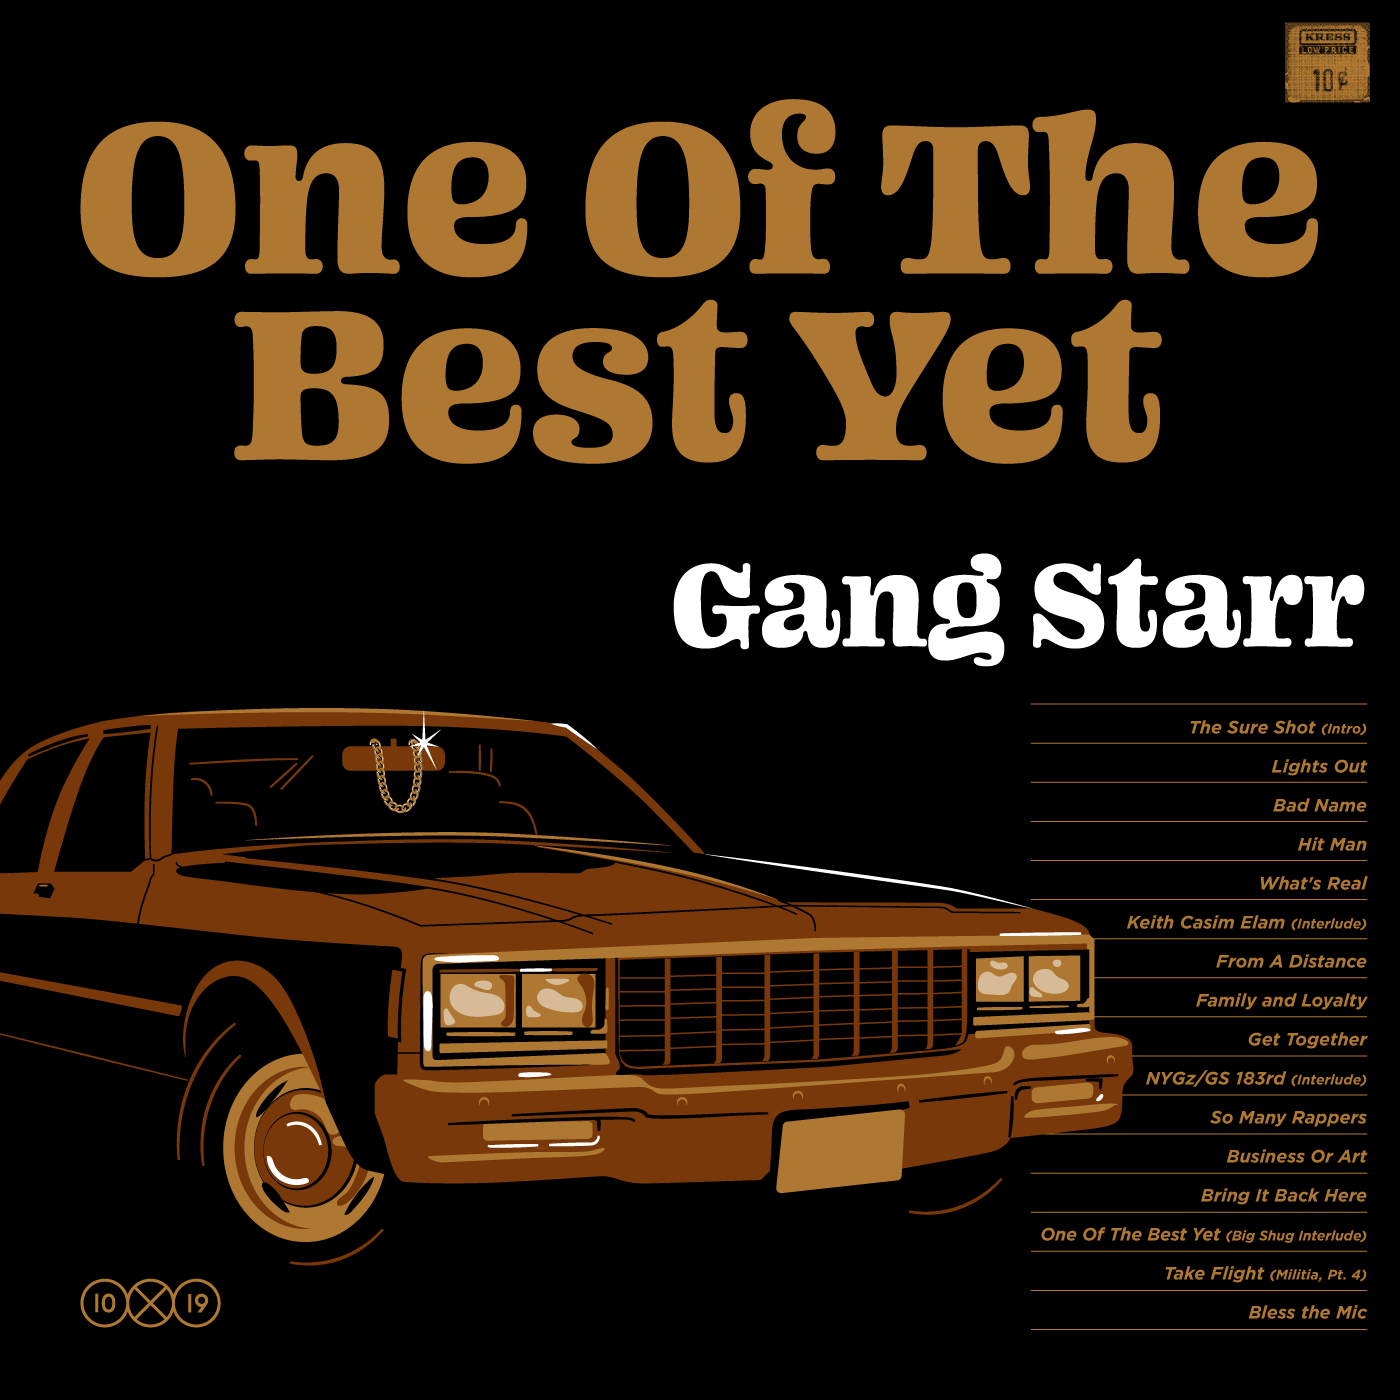 Gang Starr album cover by Amy Hood for 10x19